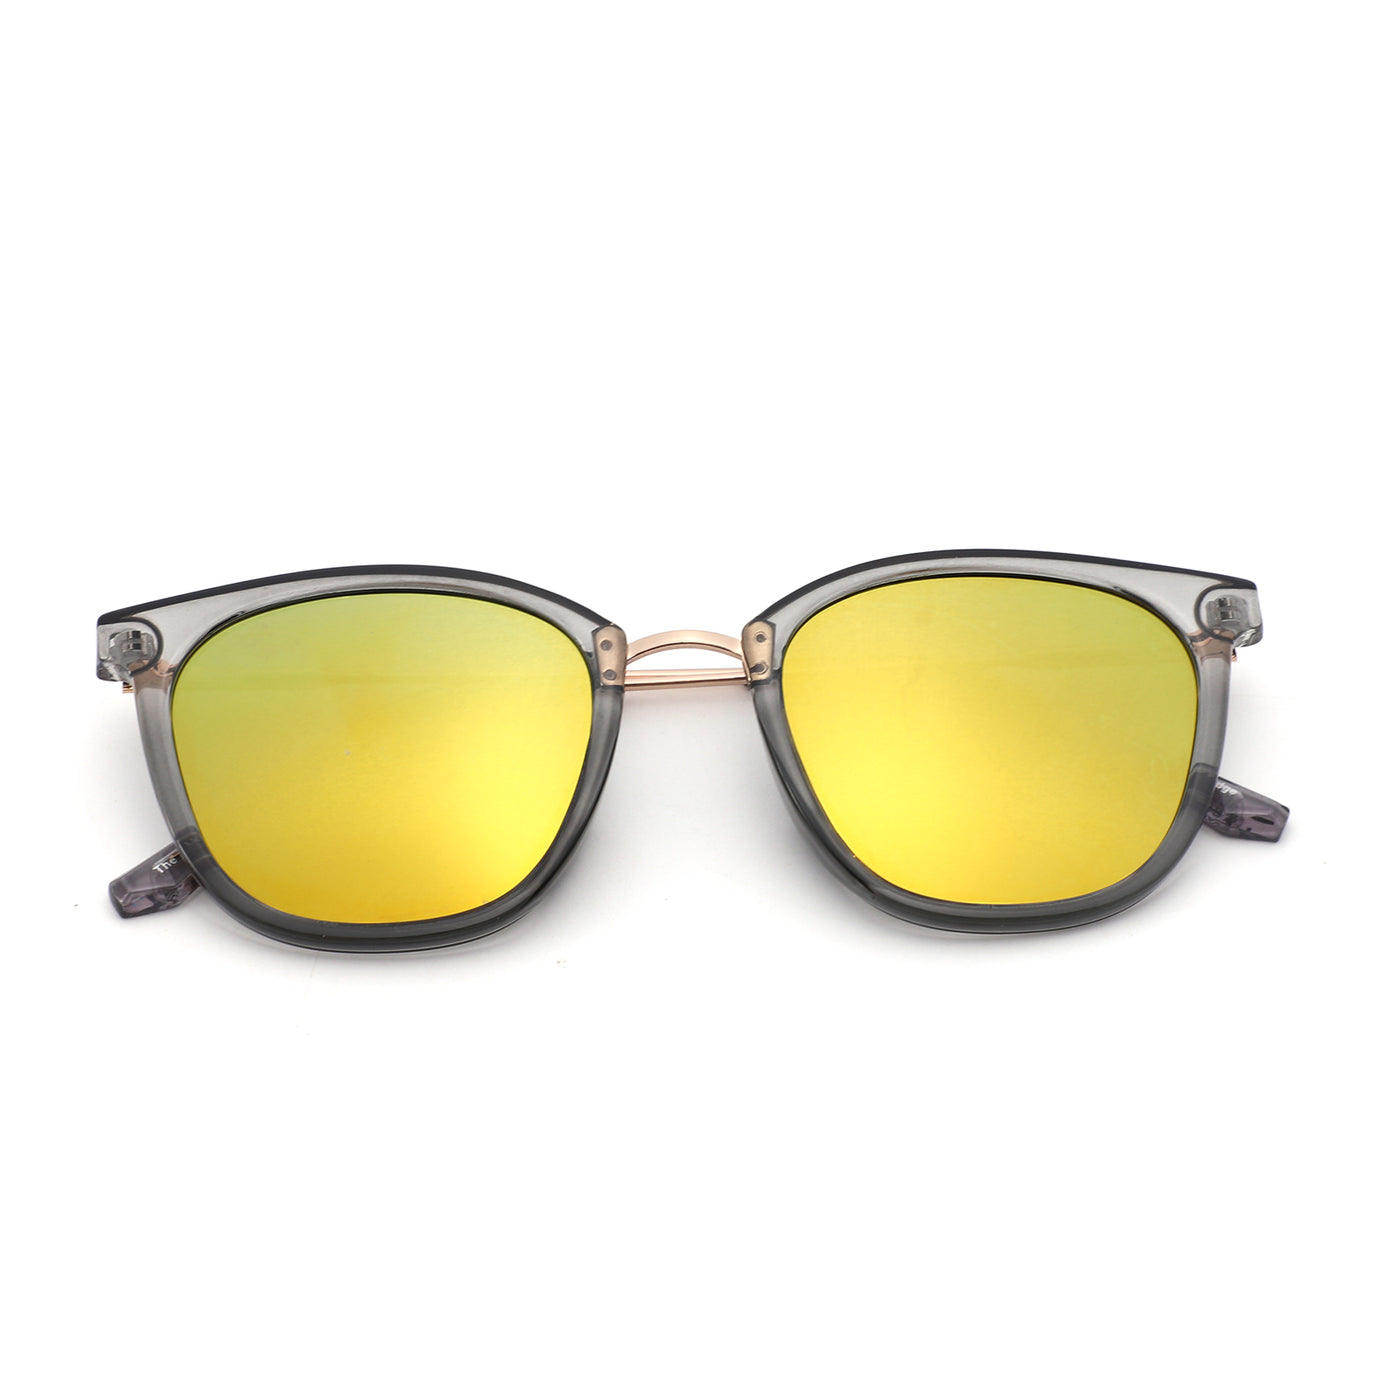 The Wedge Gold/Grey Frame, Sunset Yellow Lens